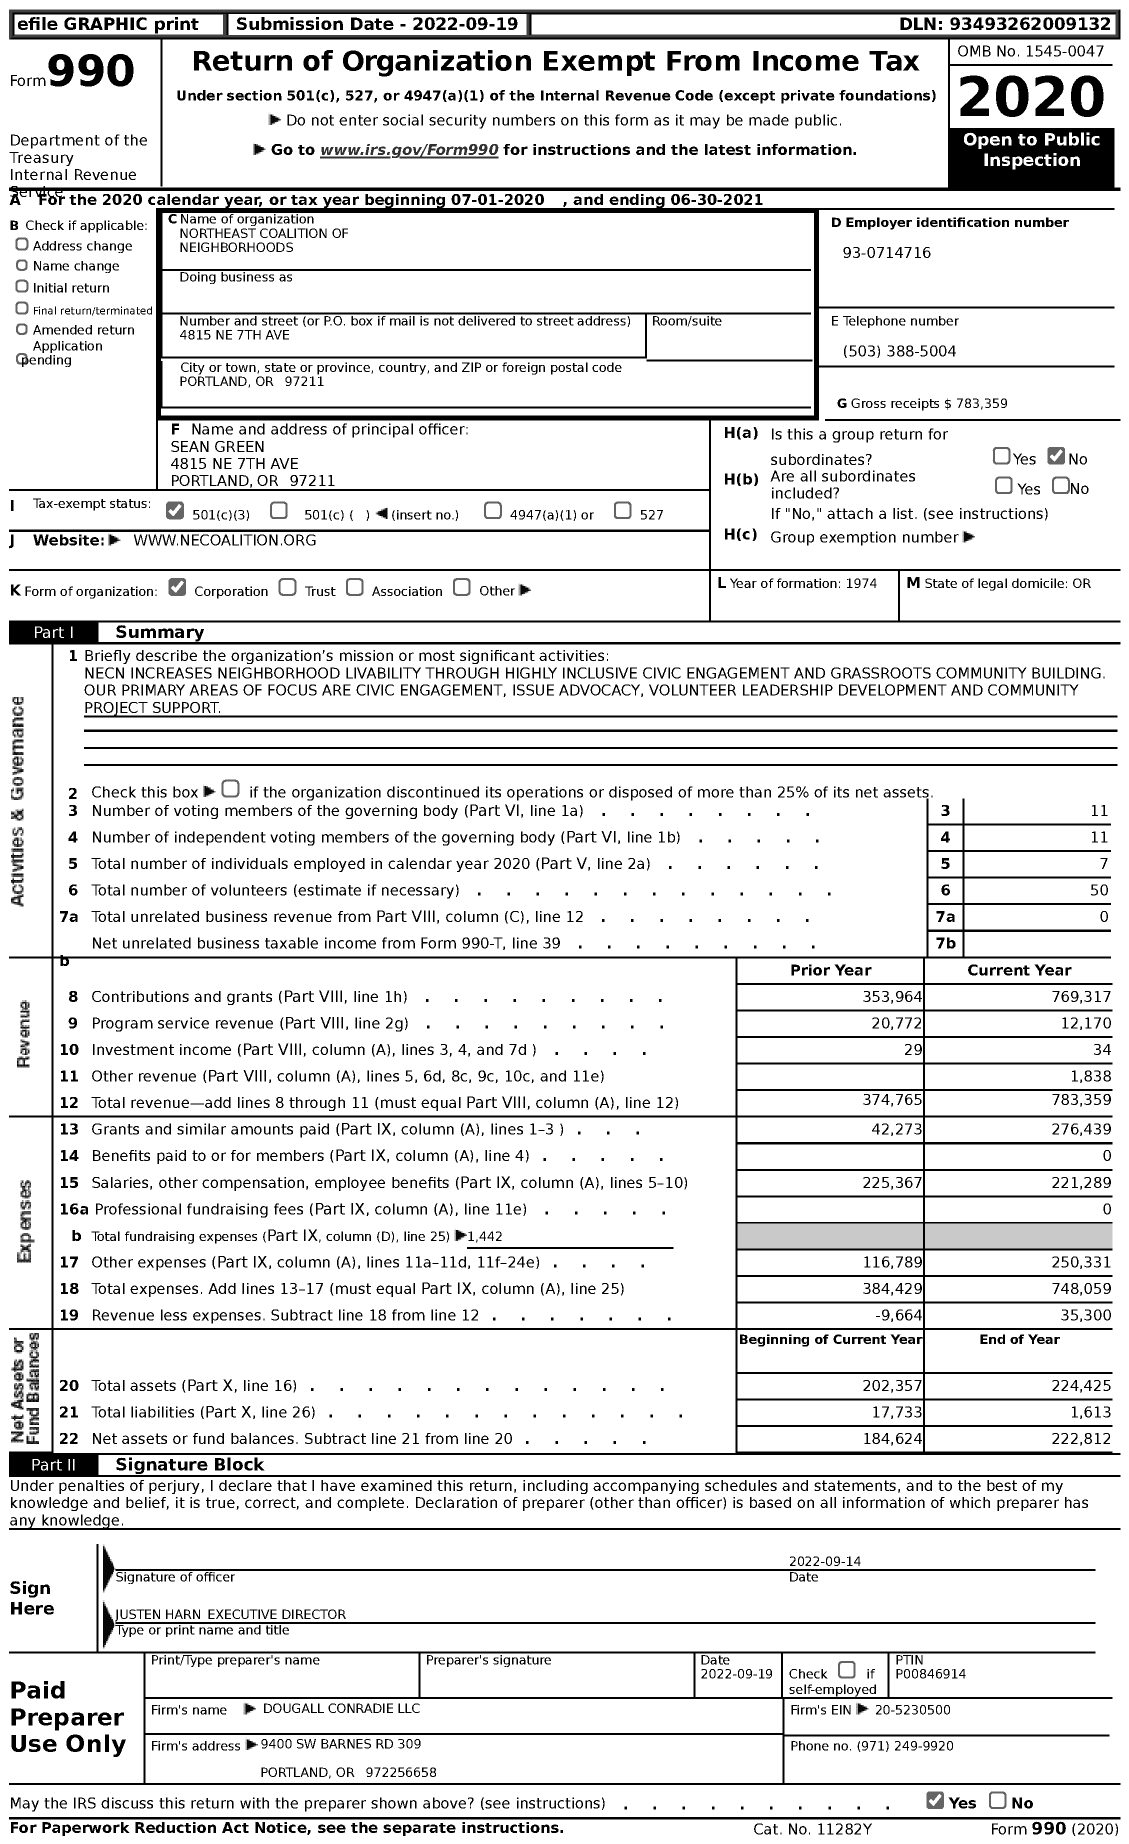 Image of first page of 2020 Form 990 for Northeast Coalition of Neighborhoods